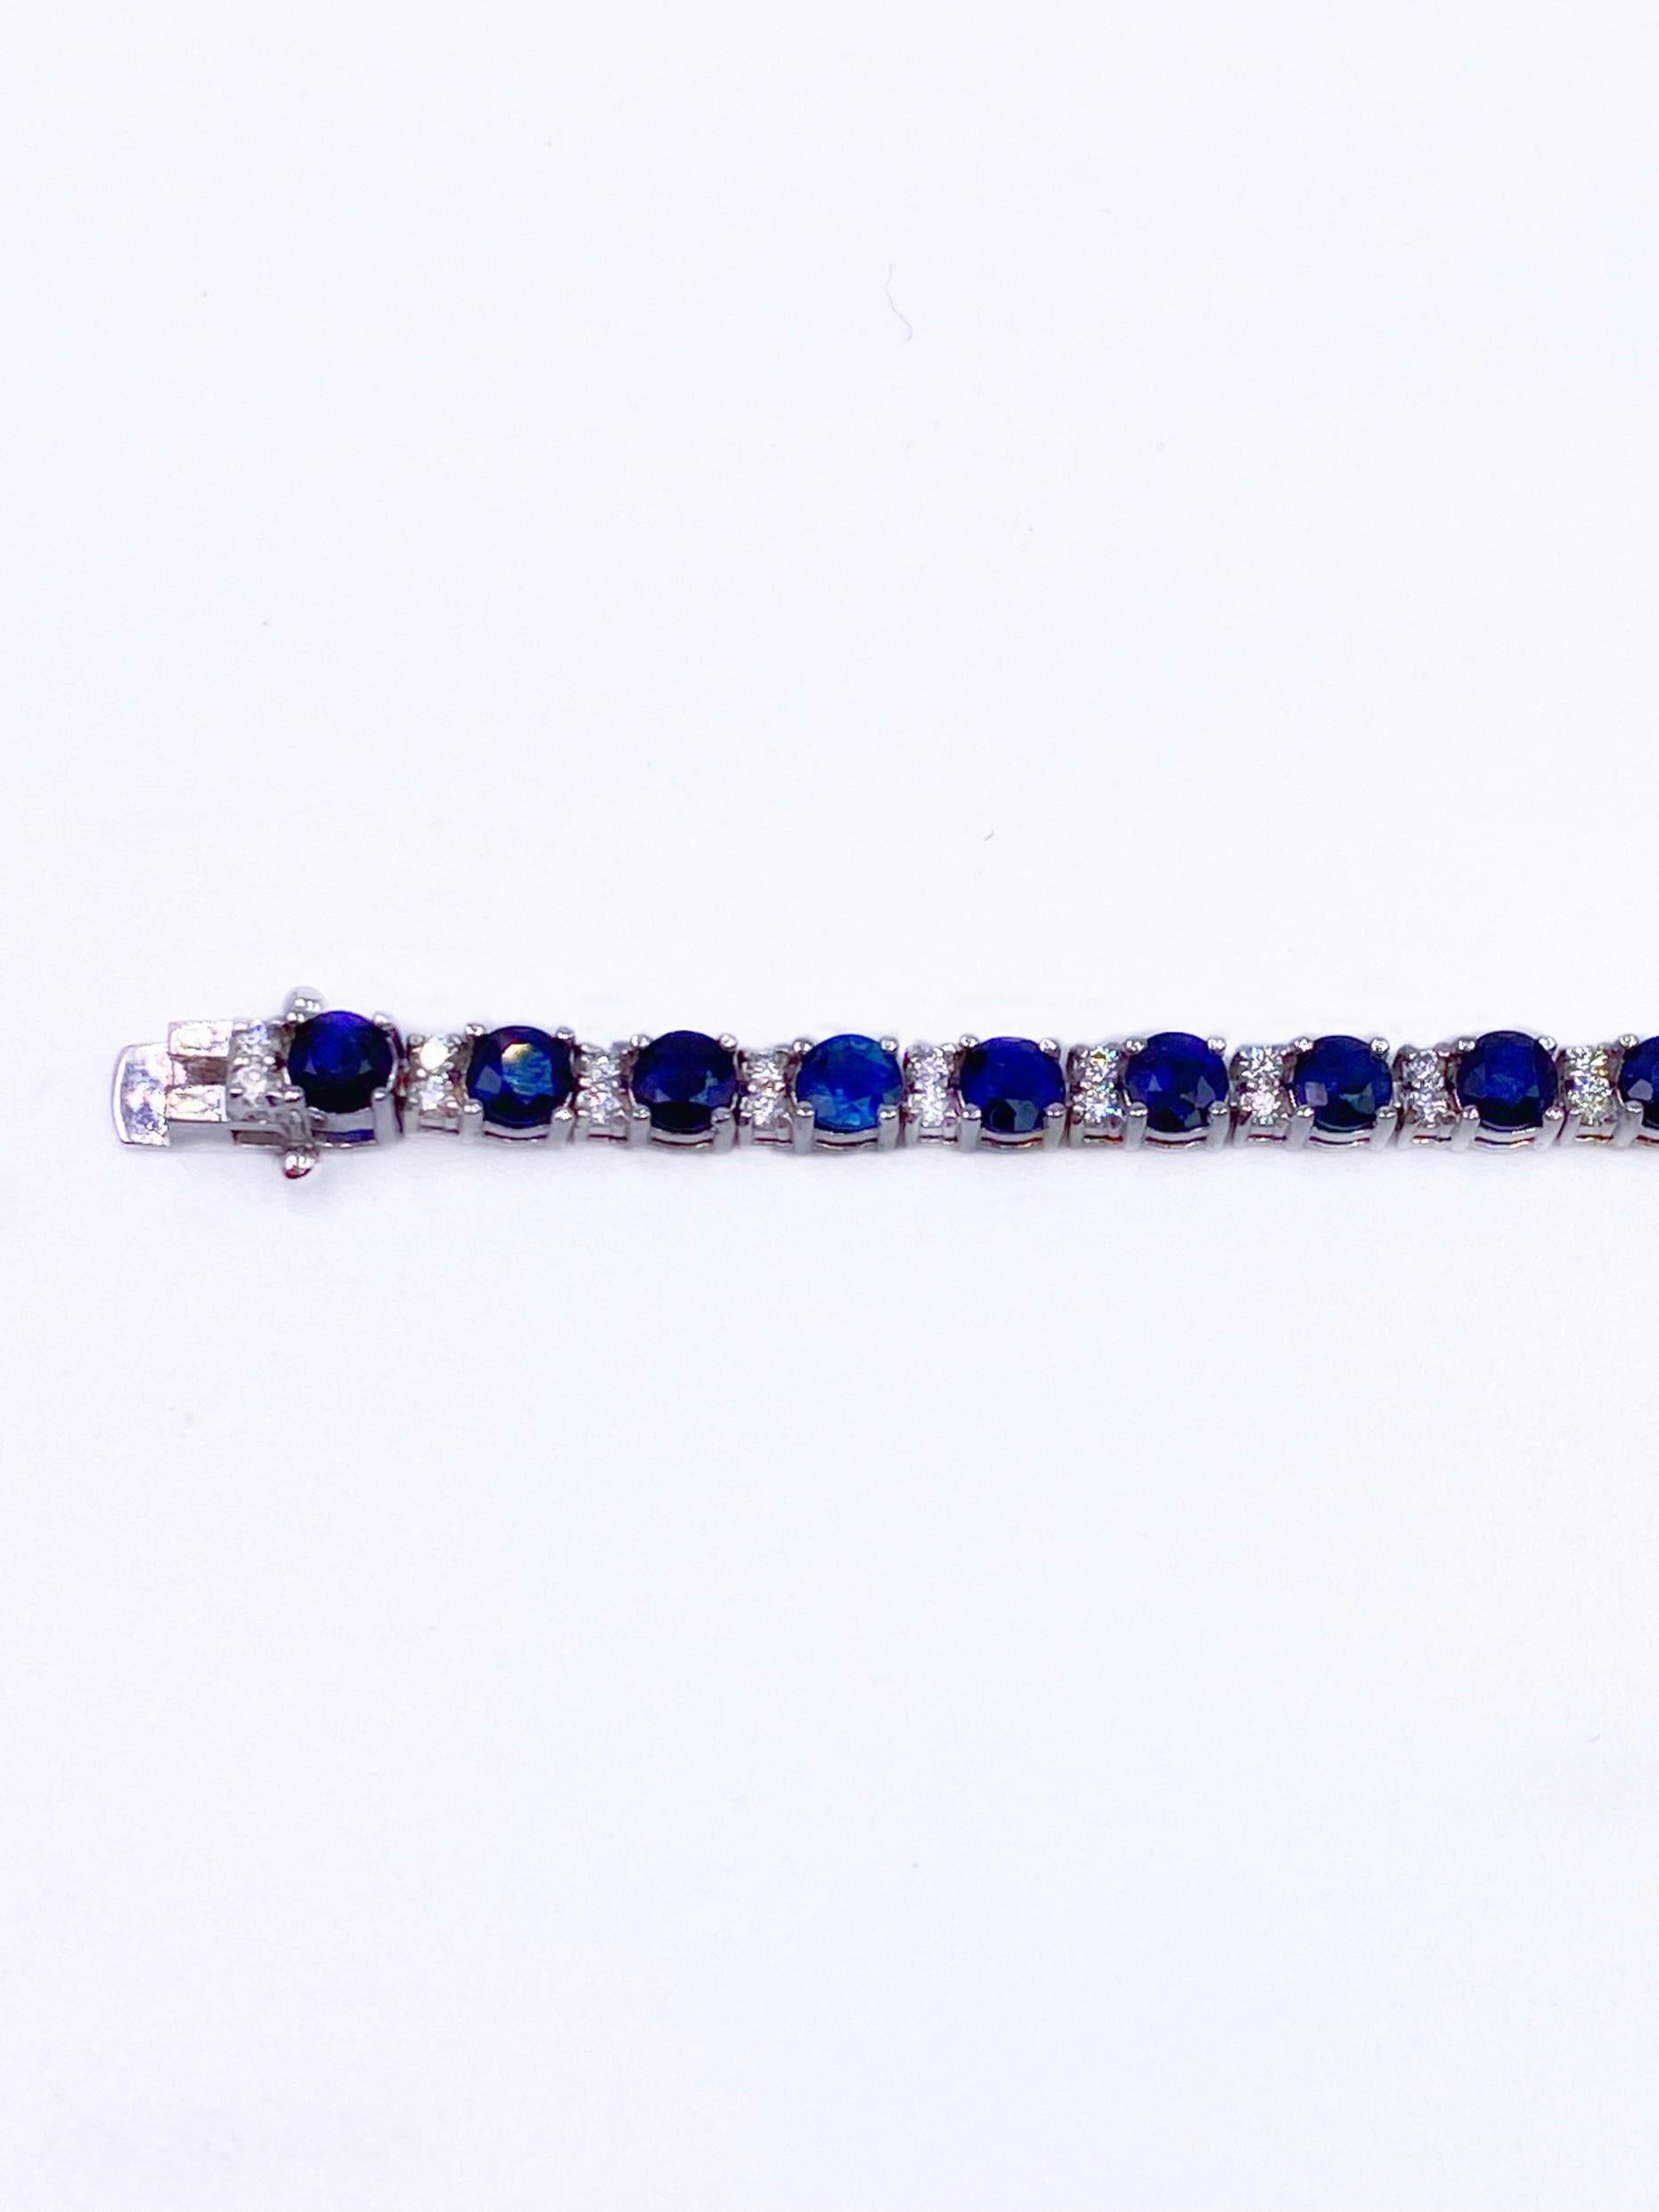 13 Ct (5 x 4mm) Blue Sapphires
1 Ct (F-G color, VS2) diamonds

Inspired by the fire and radiance of our superlative sapphires and diamonds, ALPENGEM uses a round cut flawless gems for a distinctly romantic sensibility. This feminine take on the